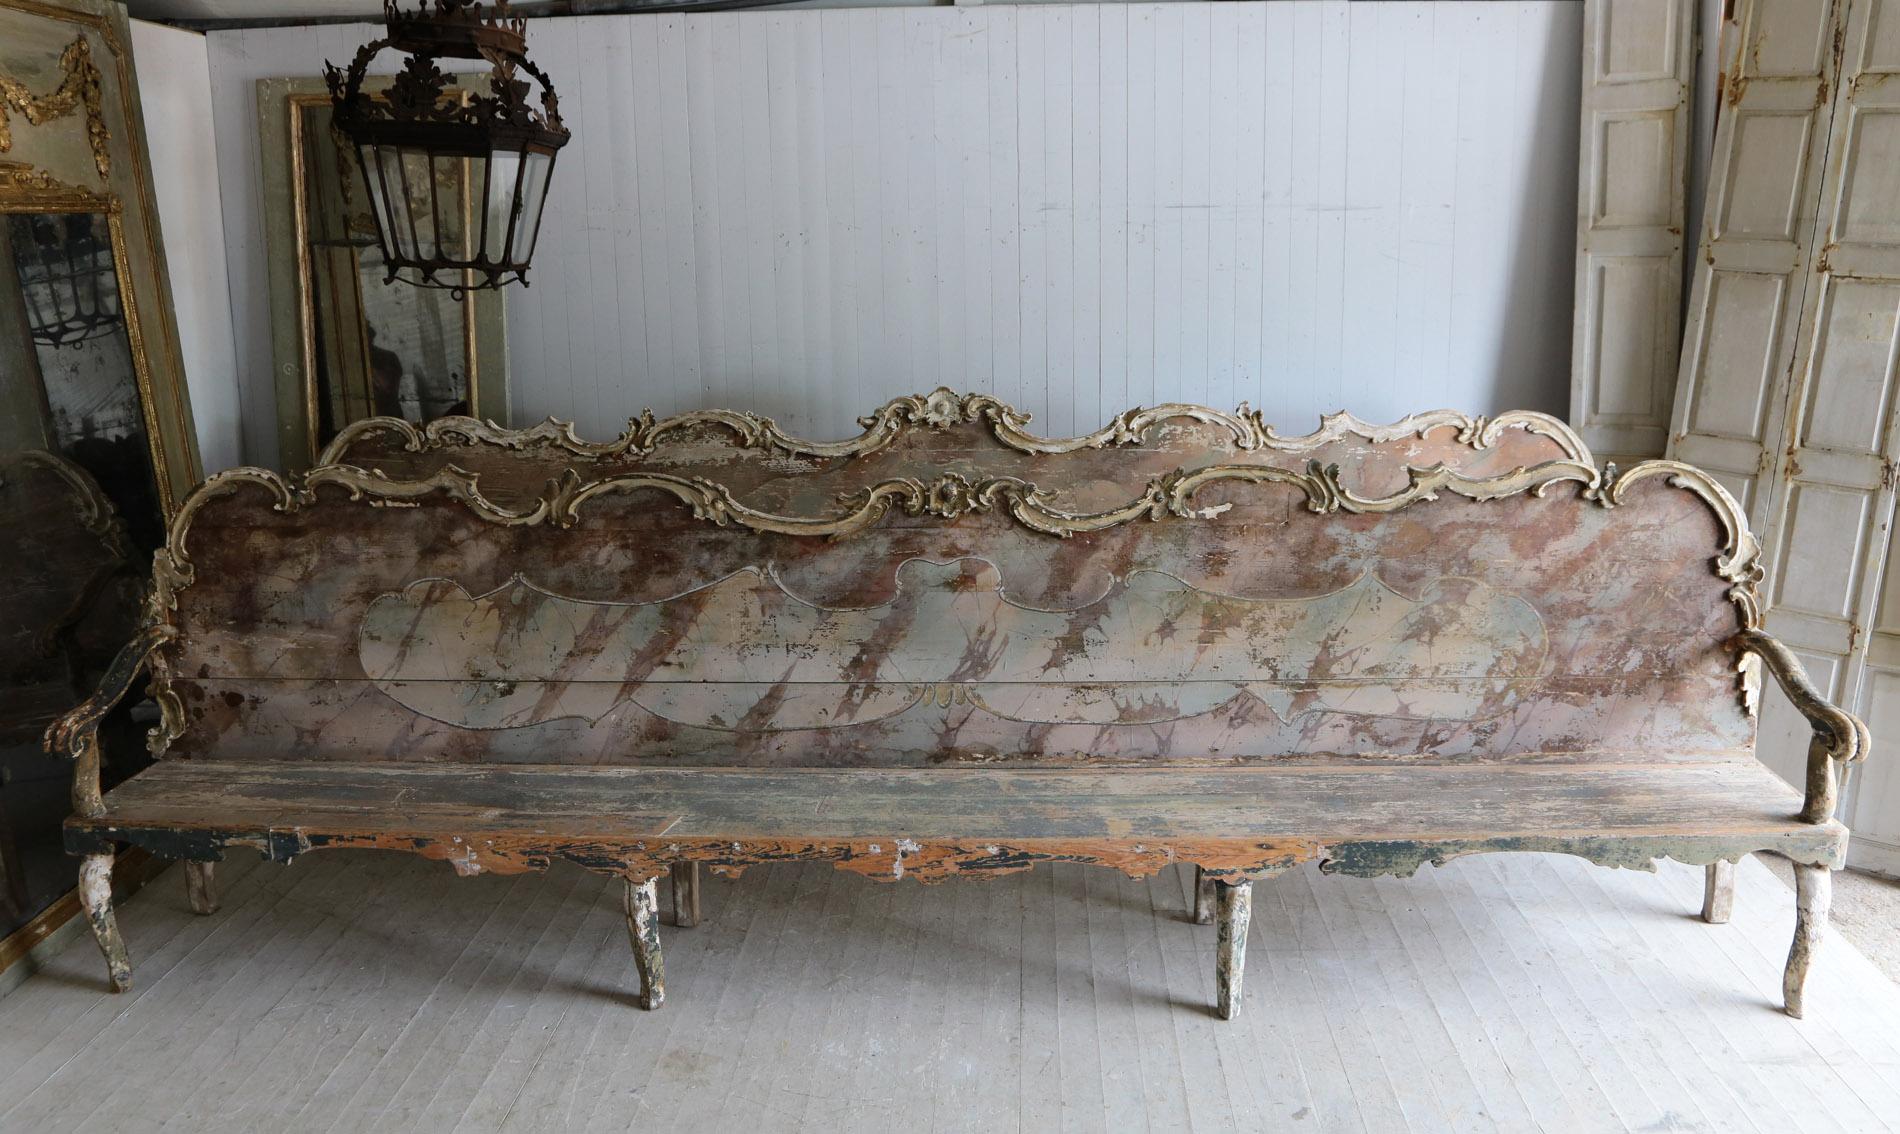  Monumental Grand Pair of 17thC Early 18th Century Italian Baroque Benches In Distressed Condition For Sale In Poling, West Sussex